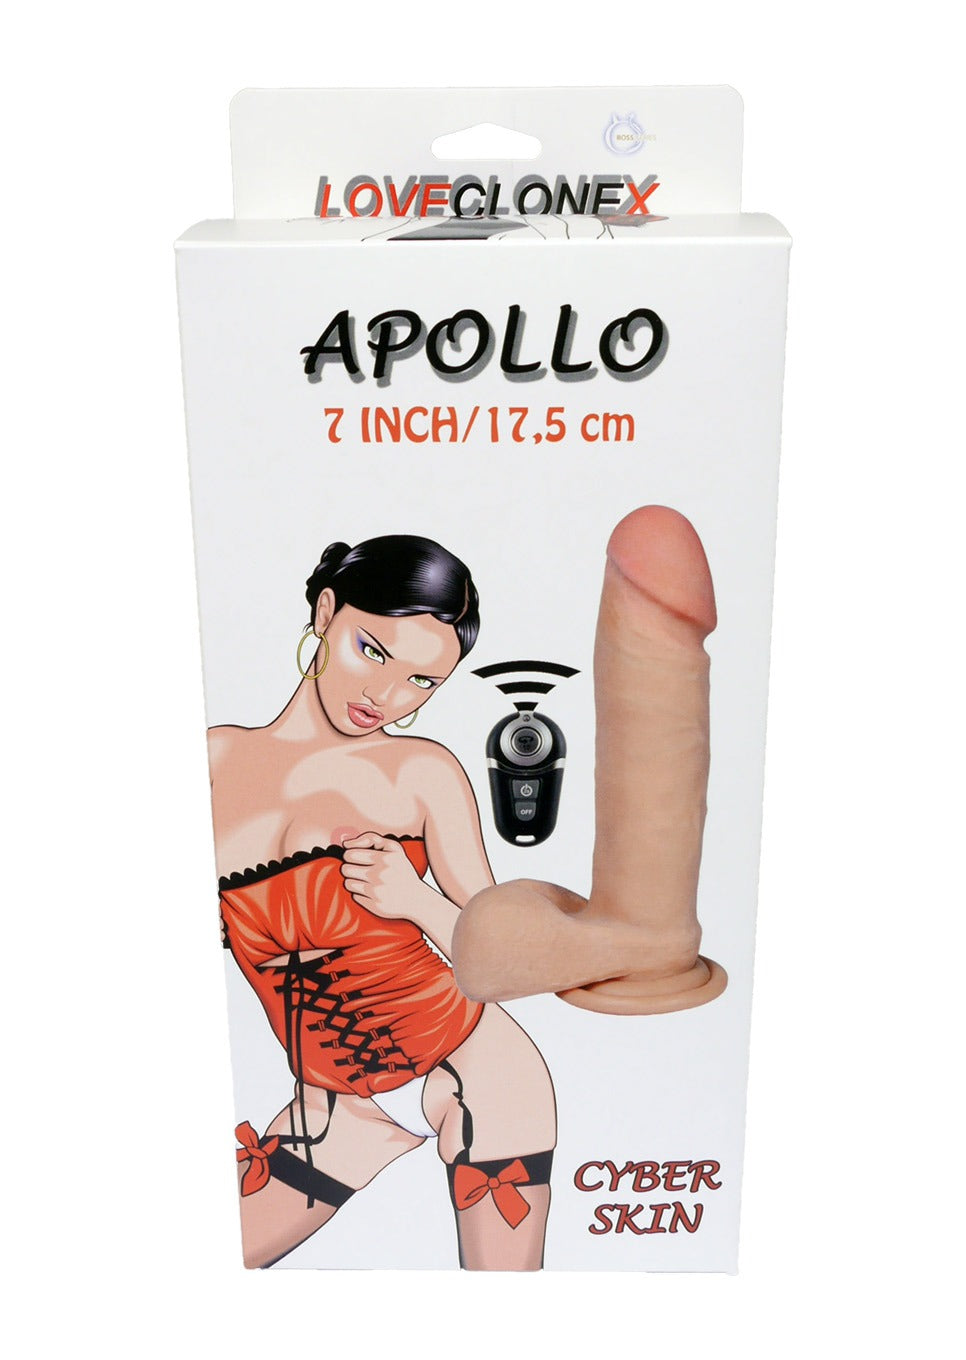 Bossoftoys - 21-00005 - Apollo - Loveclonex - Ultra-realistic Vibrator - Cyberskin feels real - Better than Silicone - 5-7 cm thick - Suction cup - Wireless remote control - Rechargeable - Skin color - 7 inch / 17.5 cm